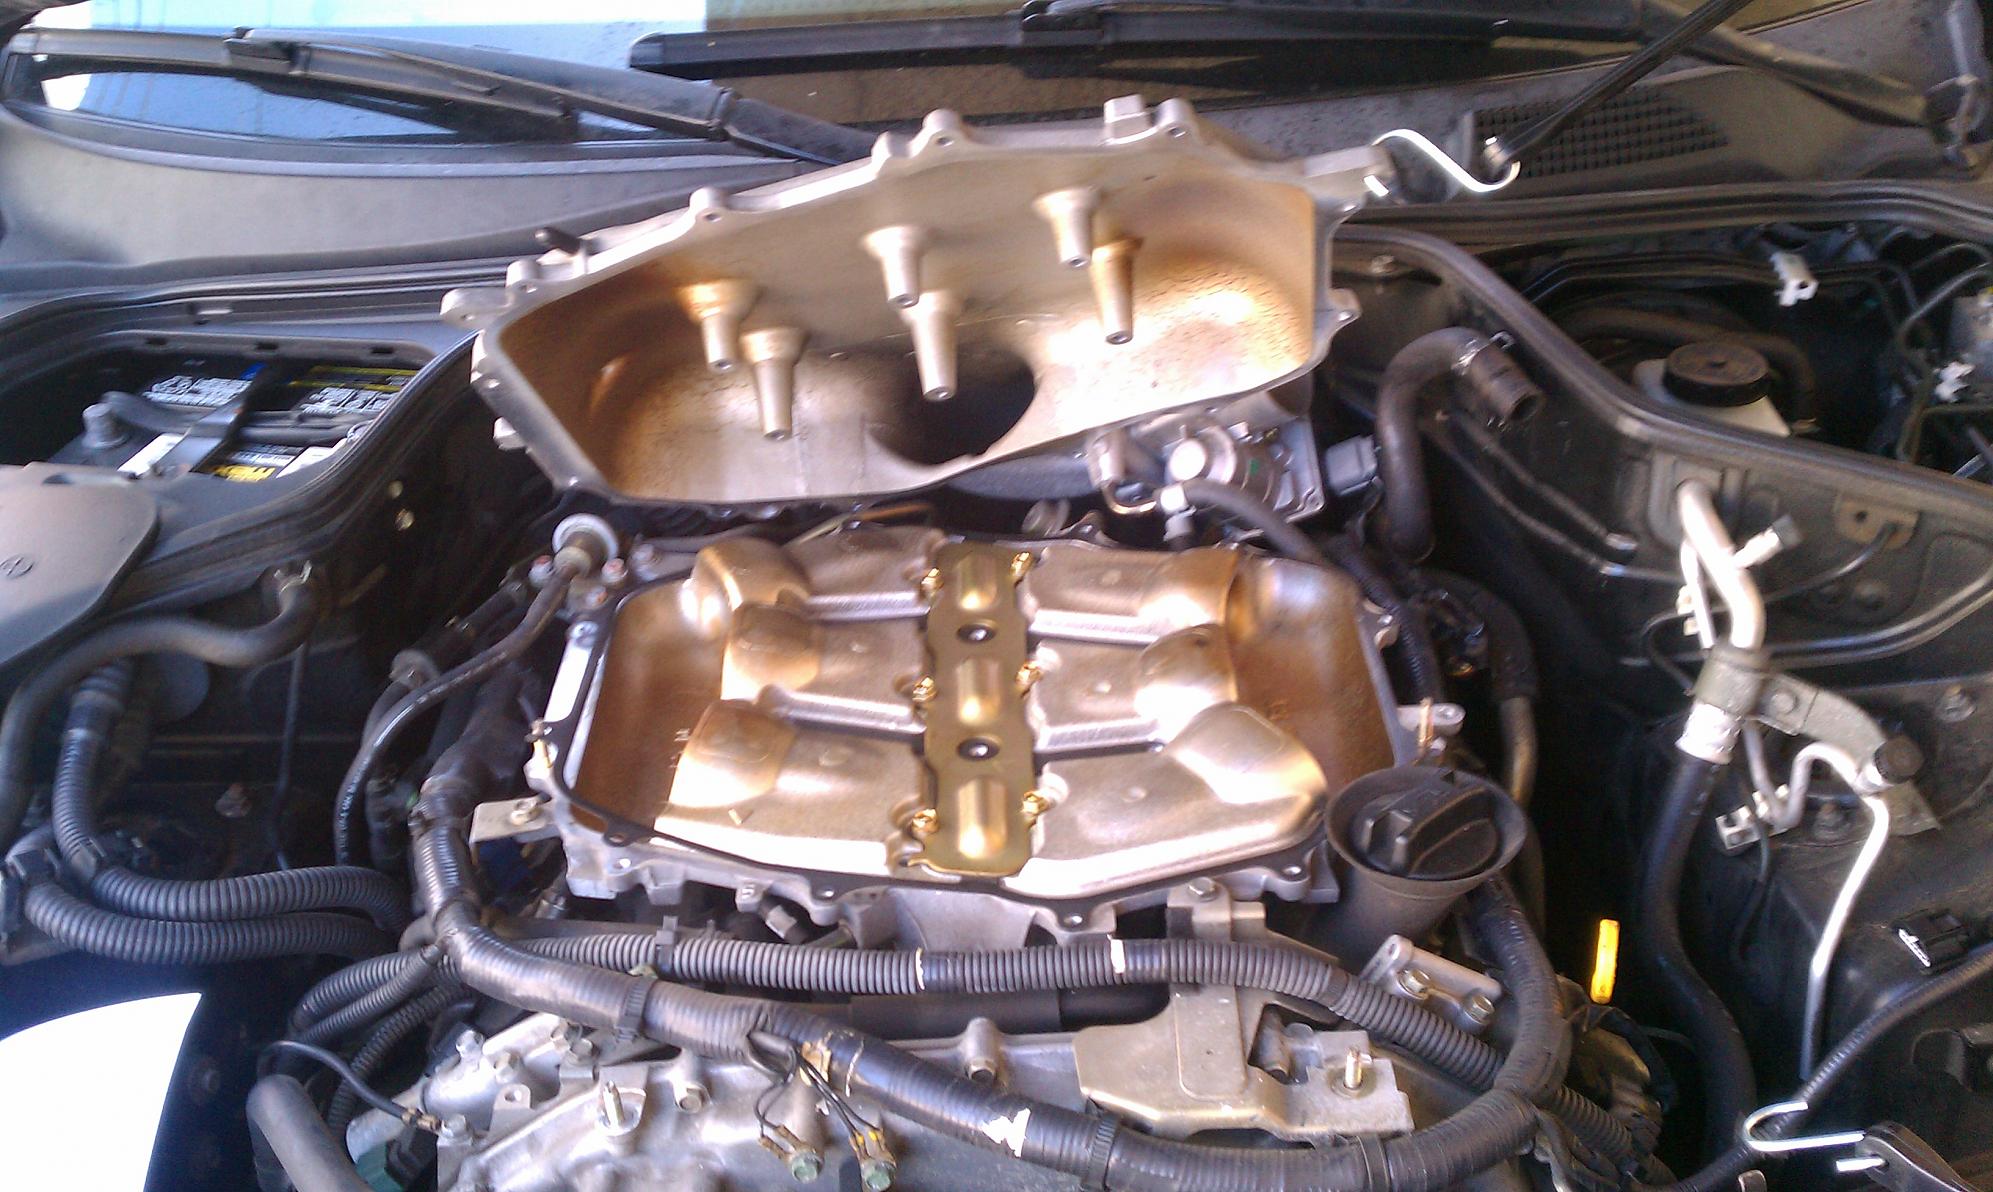 G35 Valve Cover Gasket Replacement Cost All information